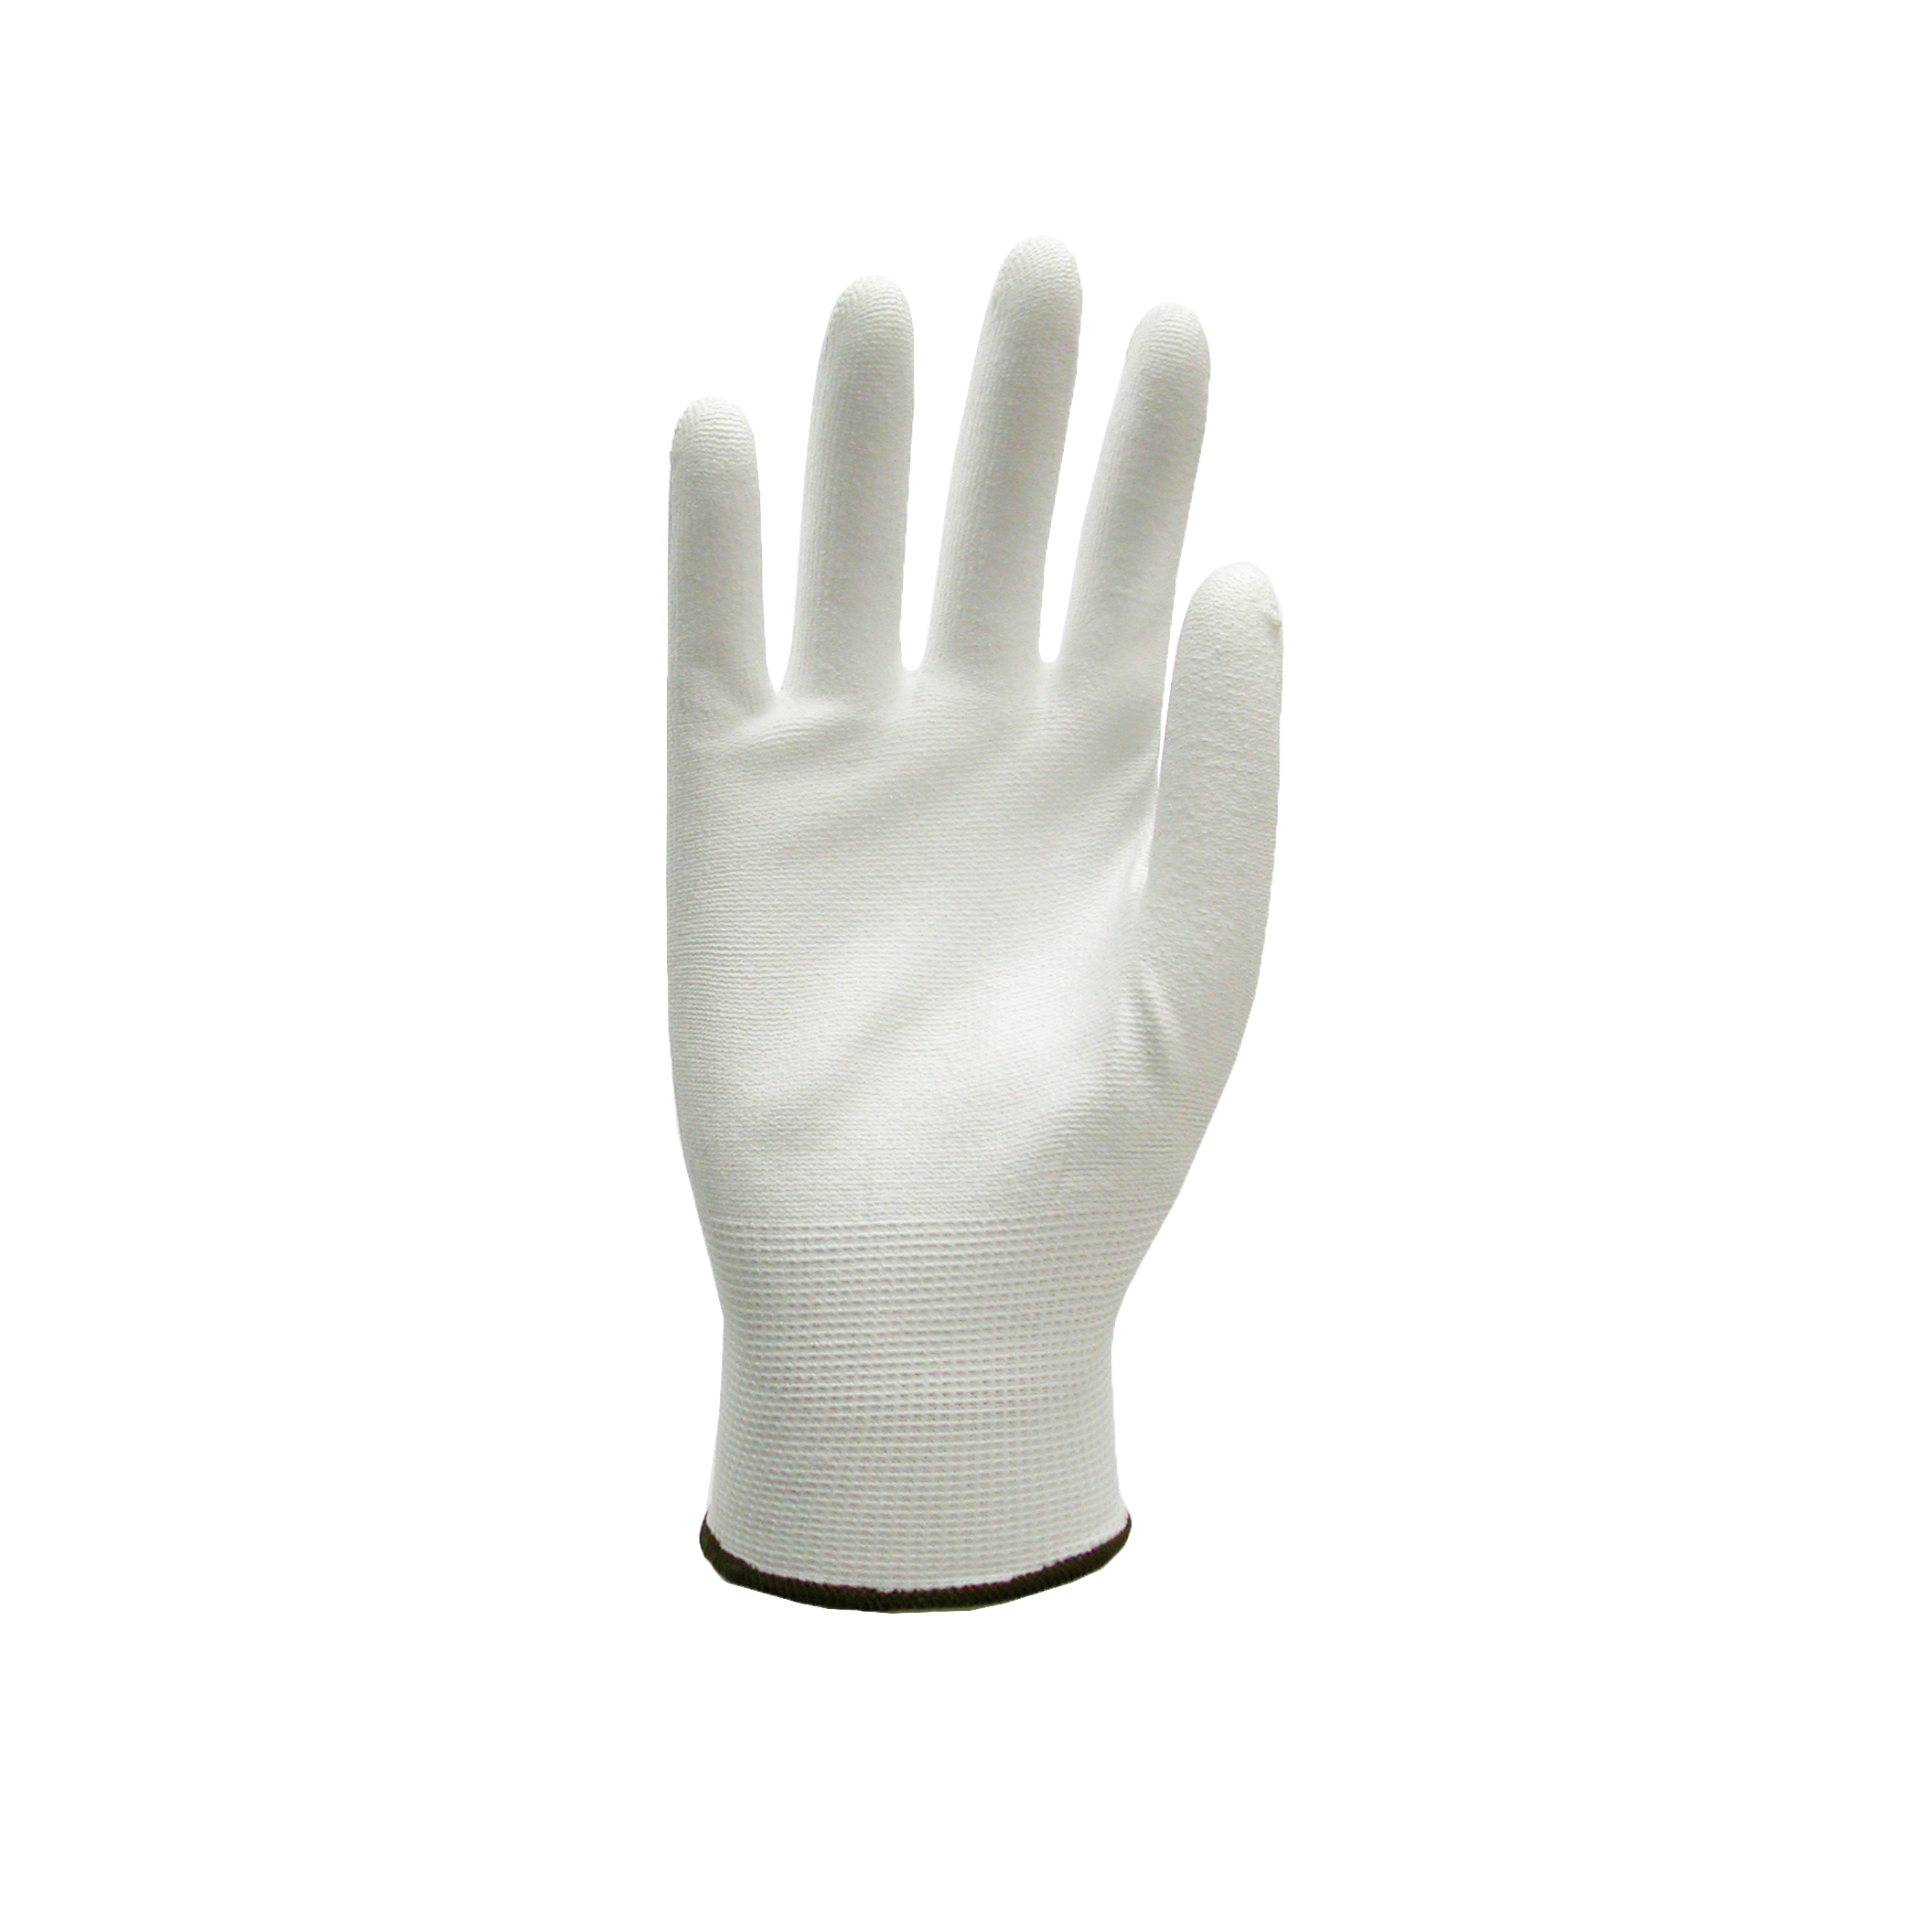 Protection Gloves Hand Safetyware Polyurethane Coated -